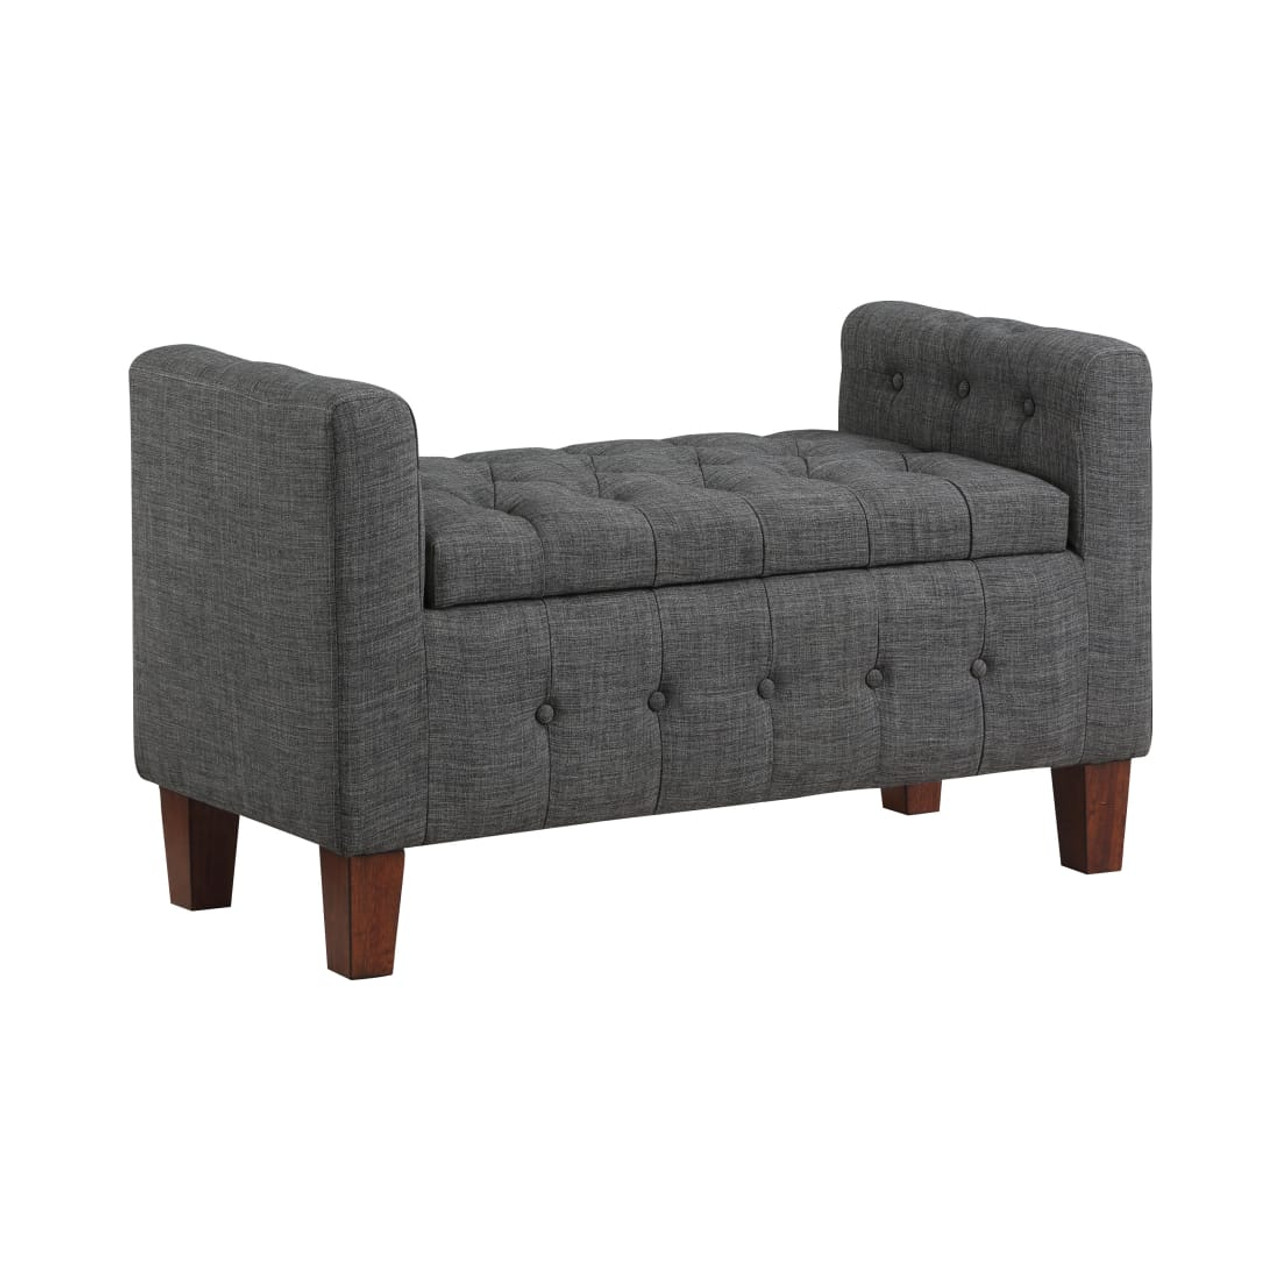 Darnley Storage Bench in Charcoal Fabric